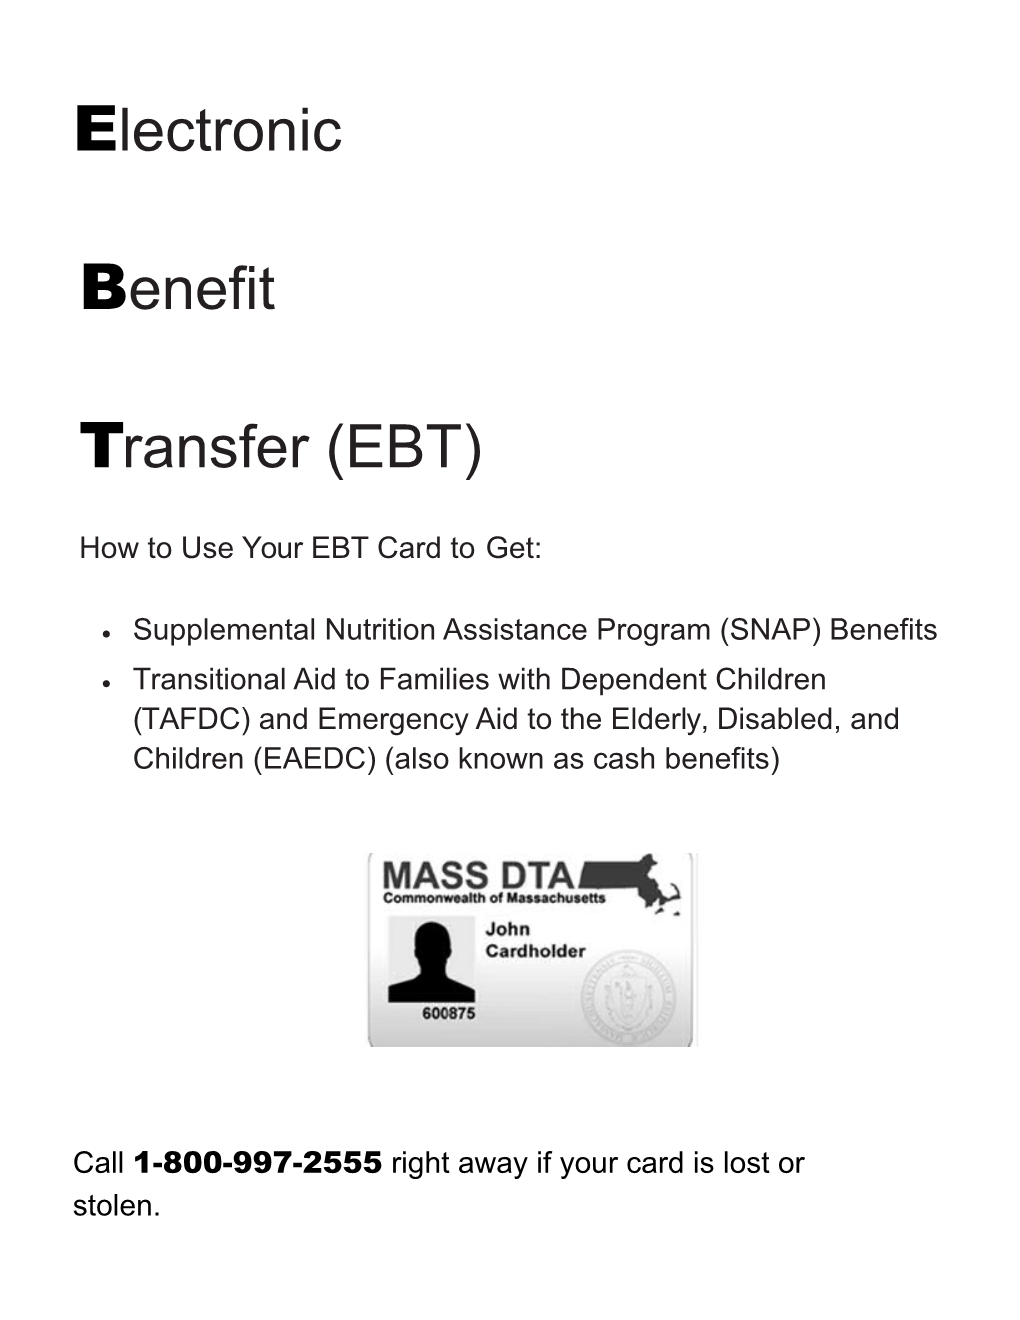 How to Use Your EBT Card to Get